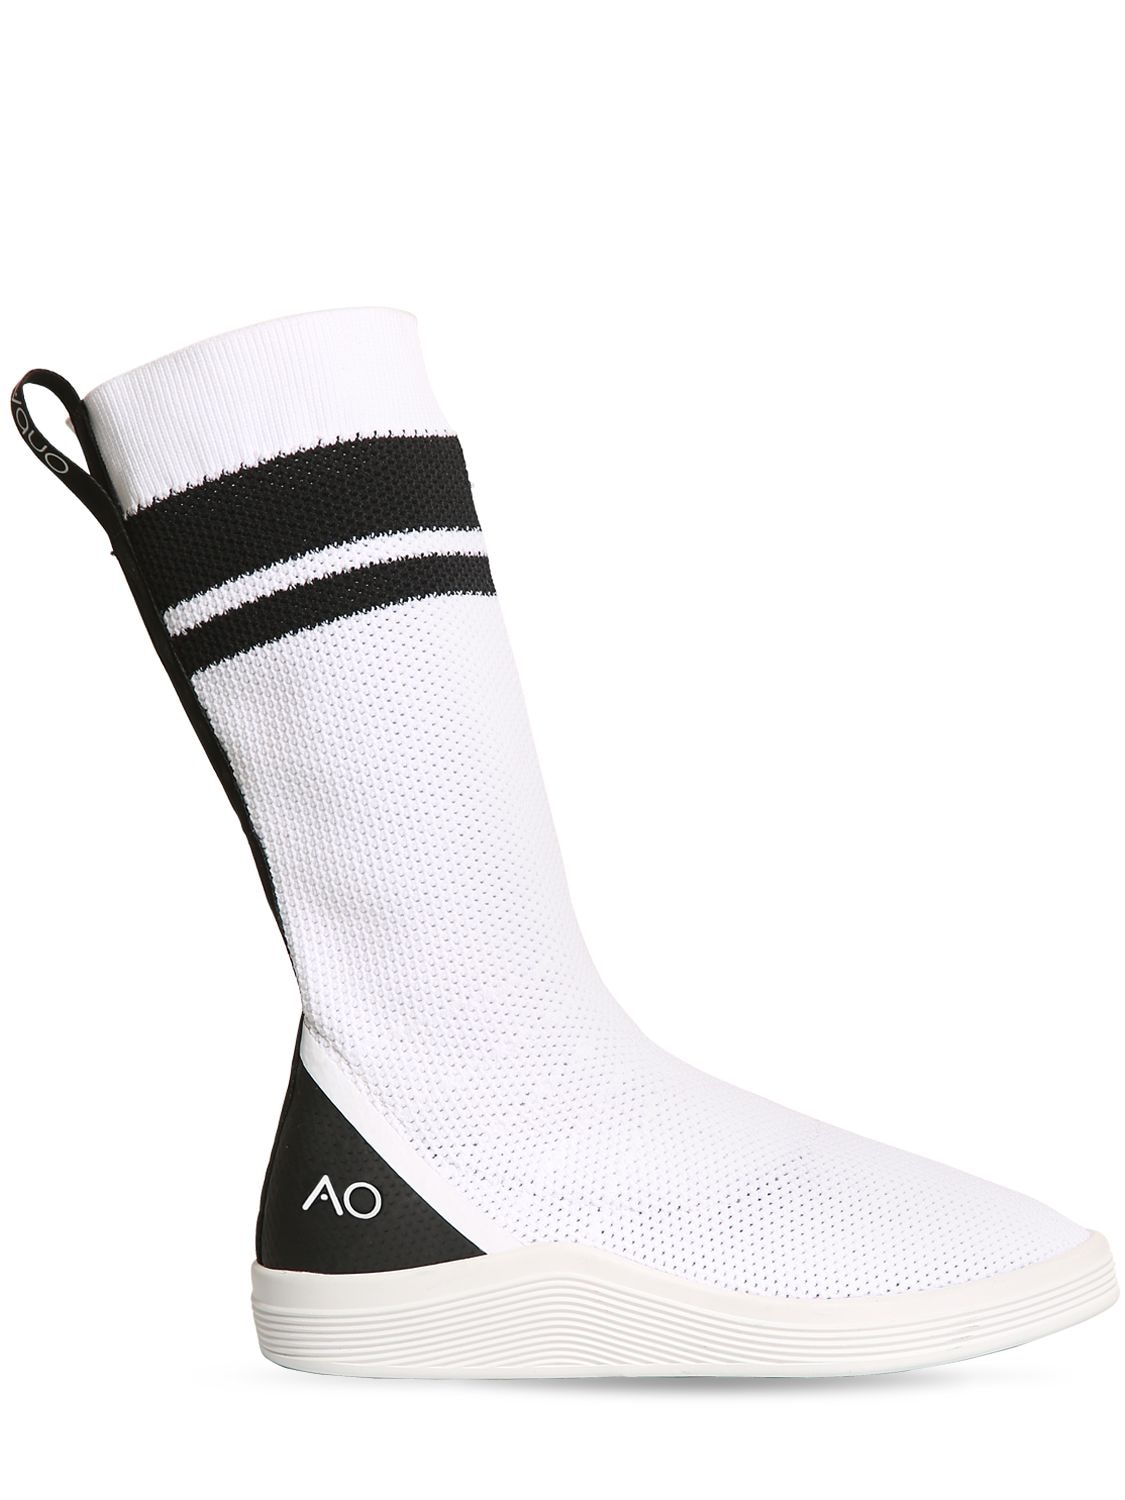 ADNO Striped Knit Slip-on High Top Sneakers